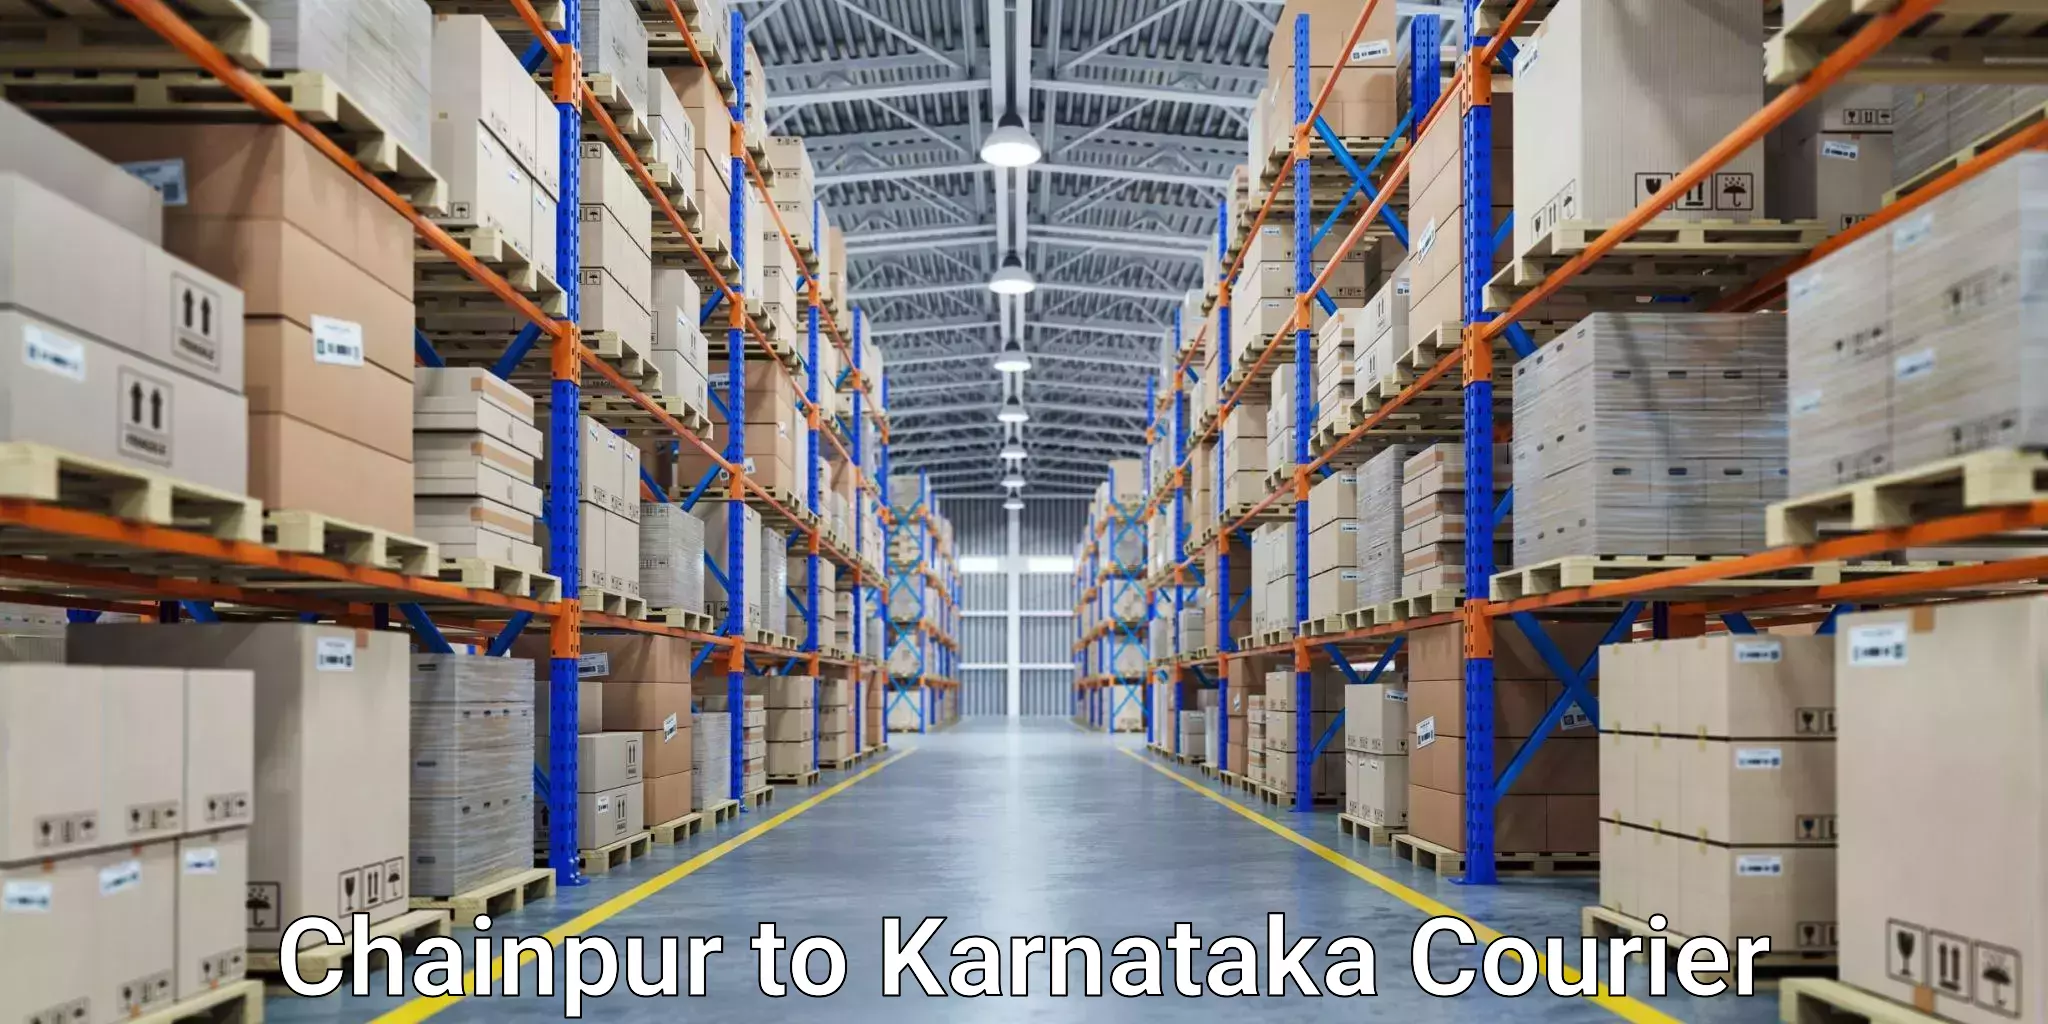 Customer-focused courier Chainpur to Mangalore Port